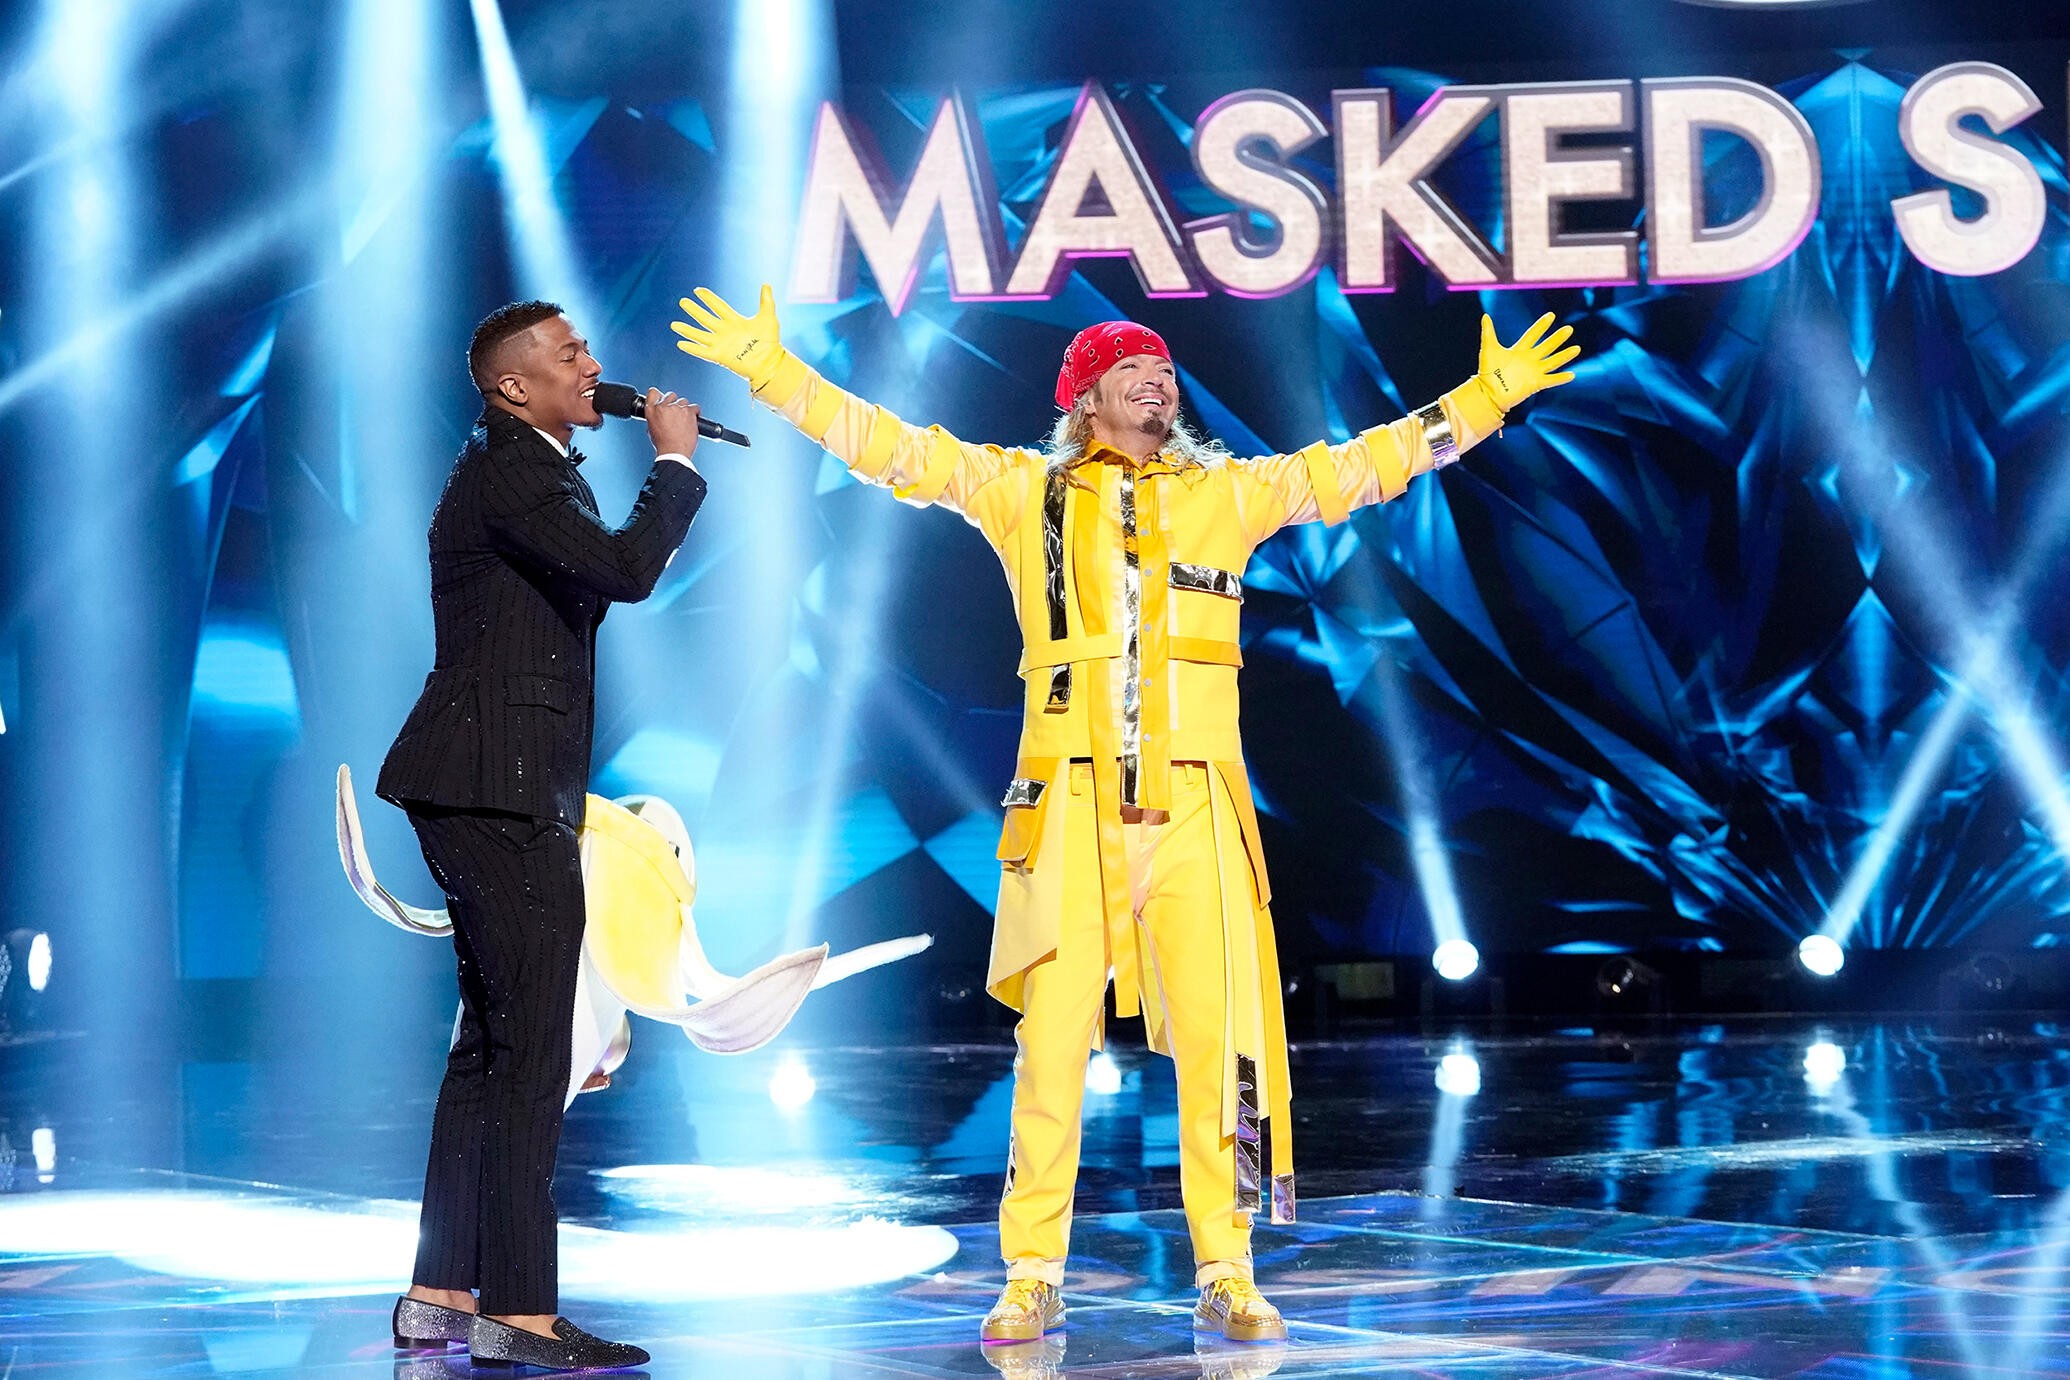 The Masked Singer Feature